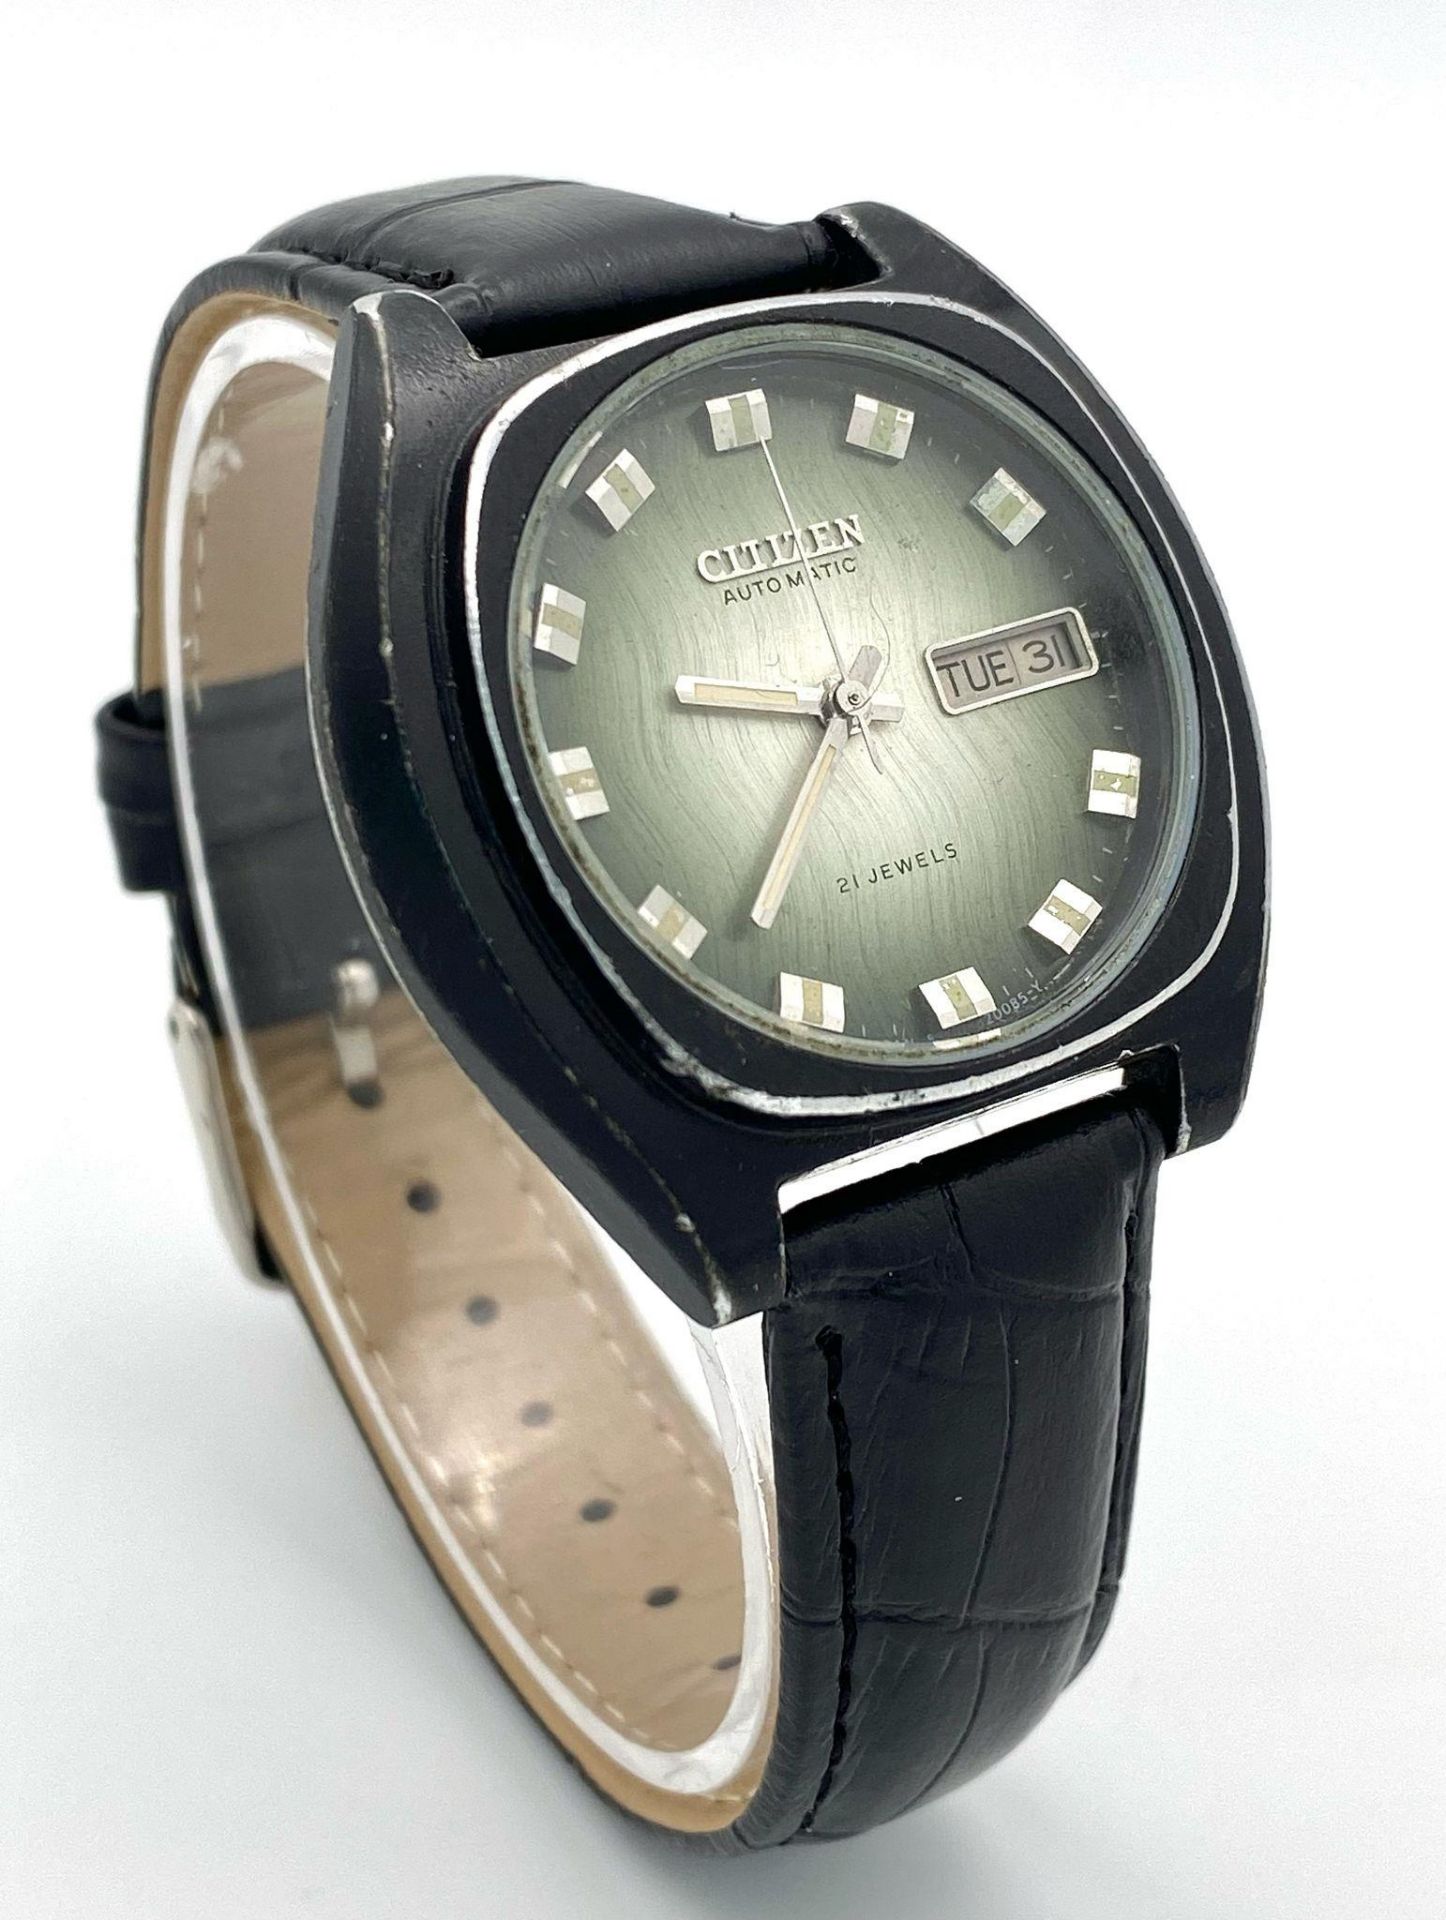 A Vintage Citizen 21 Jewels Automatic Gents Watch. Black leather strap. Black stainless steel case - - Image 3 of 7